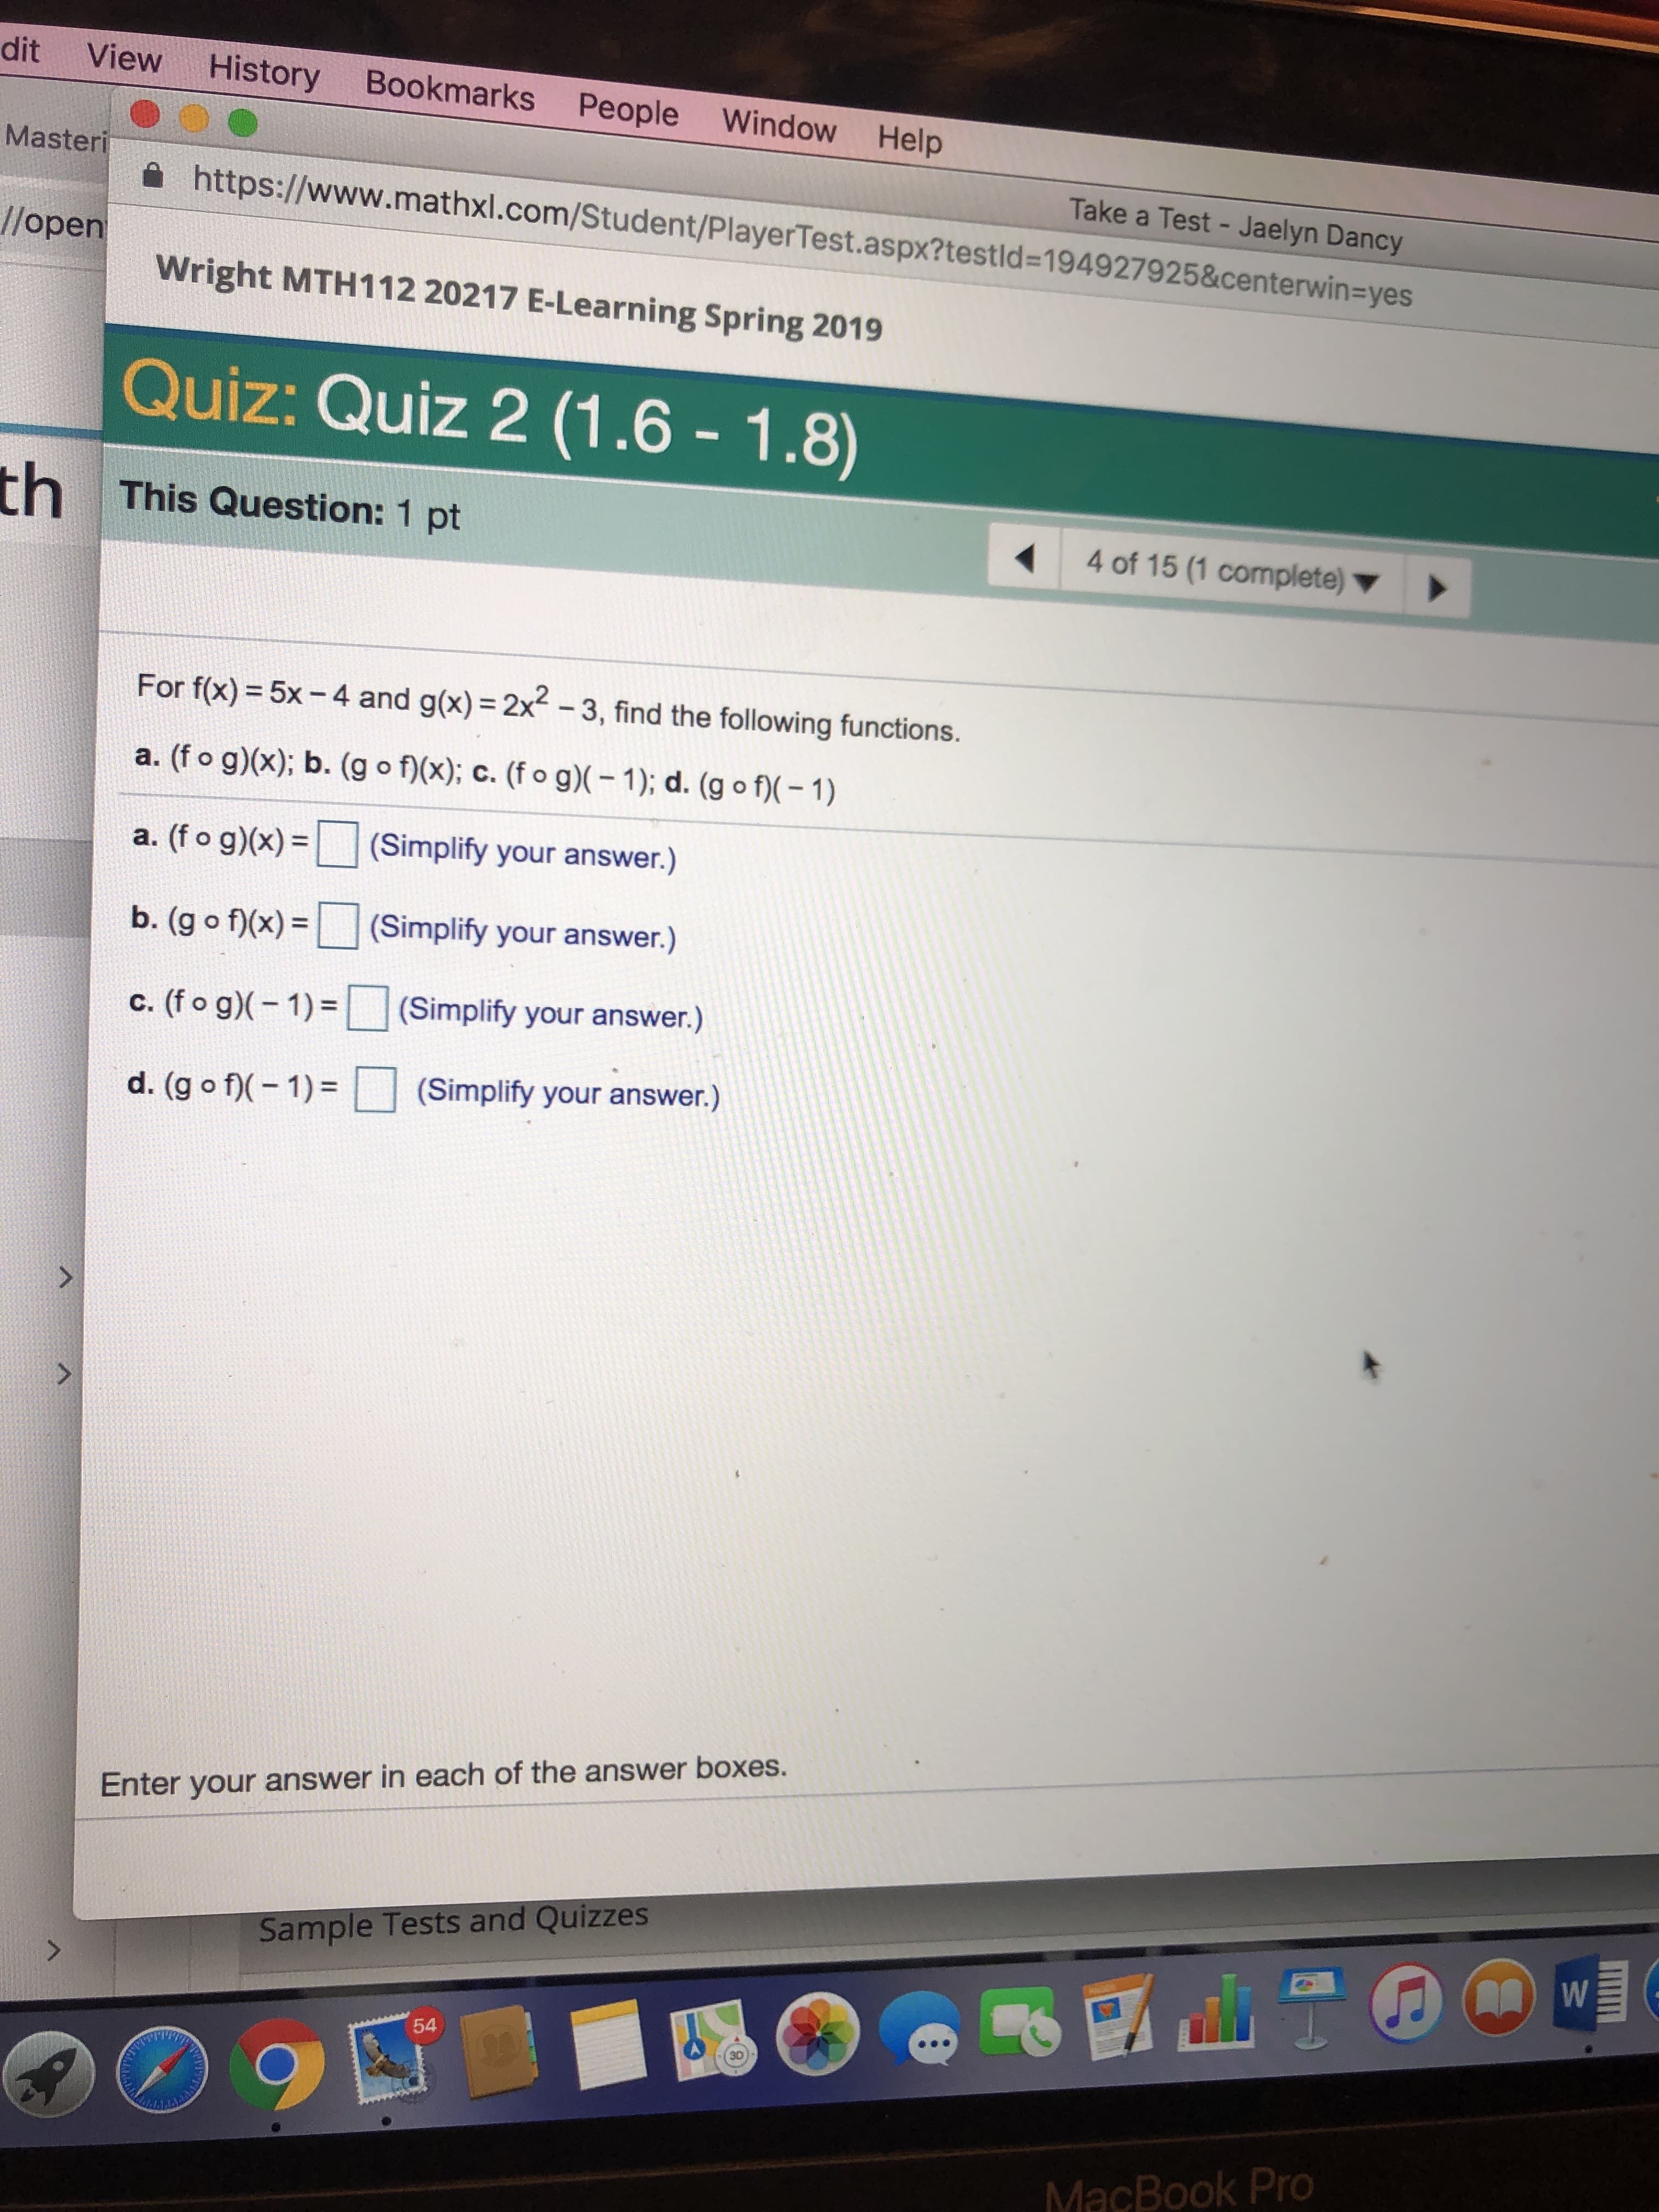 dit View History Bookmarks People Window Help
Master
Take a Test - Jaelyn Dancy
https://www.mathxl.com/Student/PlayerTest.aspx?testld-194927925&centerwin-yes
e
//open
Wright MTH112 20217 E-Learning Spring 2019
Quiz: Quiz 2 (1.6 1.8)
th
This Question: 1 pt
4 of 15 (1 complete)
For f(x) = 5x-4 and g(x) = 2x2-3, find the following functions.
a. (fo g)(x); b. (g o f)(x); C. (fo g)(-1); d. (g o f)(-1)
a. ( o g)x)(Simplify your answer.)
b. (g(Simplify your answer.)
C. (fo g)(-1)-U (Simplify your answer.)
d. (g。)(-1)= □ (Simplify your answer.)
Enter your answer in each of the answer boxes.
Sample Tests and Quizzes
54
30
MacBook Pro
